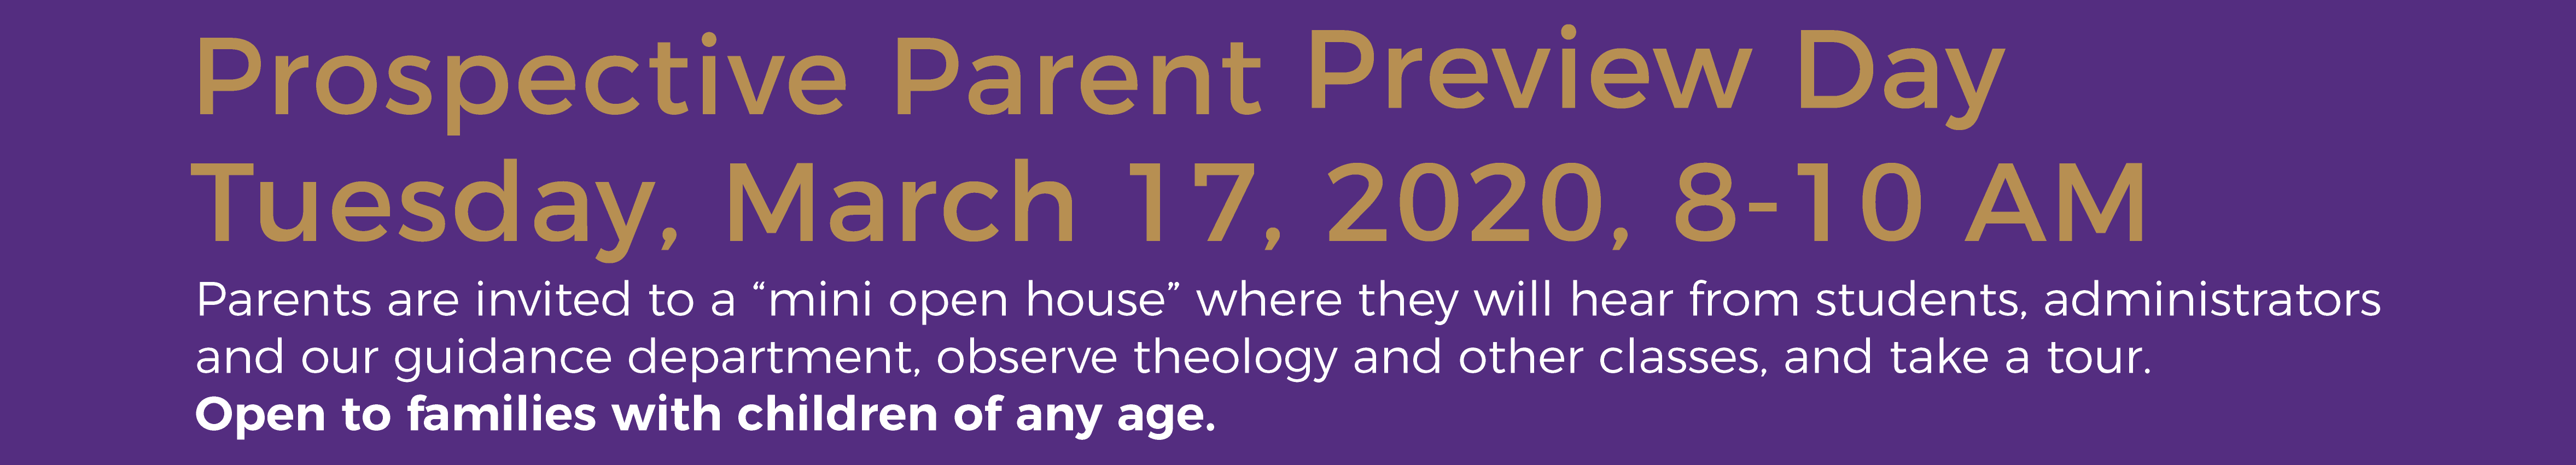 Prospective Parent Preview Day – March 17, 2020